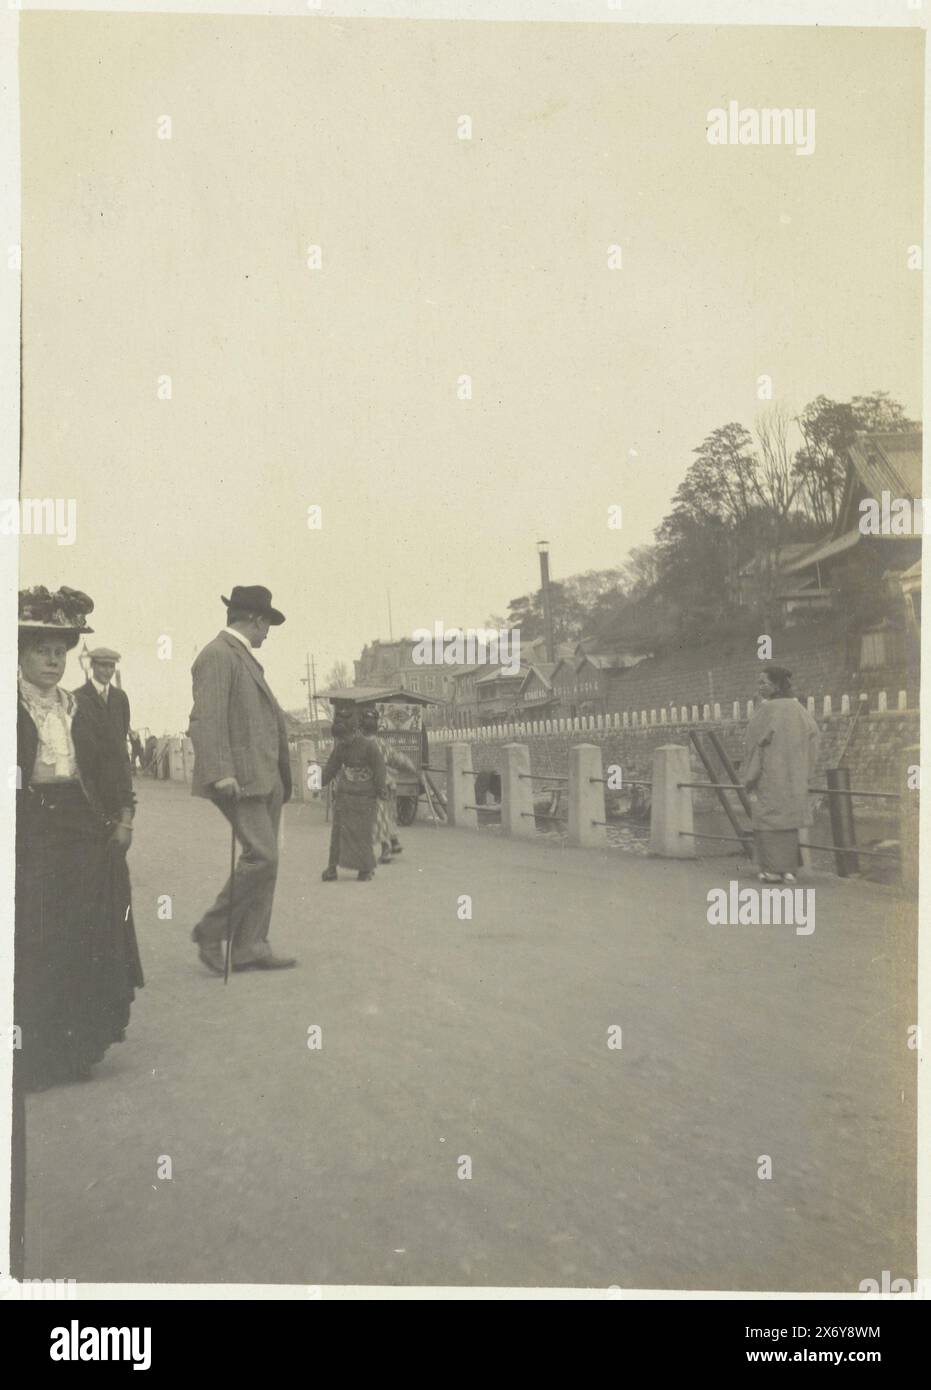 At Yokohama (title on object), The company on the street in Yokohama. Part of Dolph Kessler's photo album with shots he made during his stay in England and on a world trip he undertook as secretary of Henri Deterding (director of Royal Oil) to the Dutch East Indies, Japan, China and the United States, between 1906 and 1908., photograph, Geldolph Adriaan Kessler (Dolph), Yokohama, Apr-1908, cardboard, gelatin silver print, height, 74 mm × width, 100 mm, height, 363 mm × width, 268 mm Stock Photo